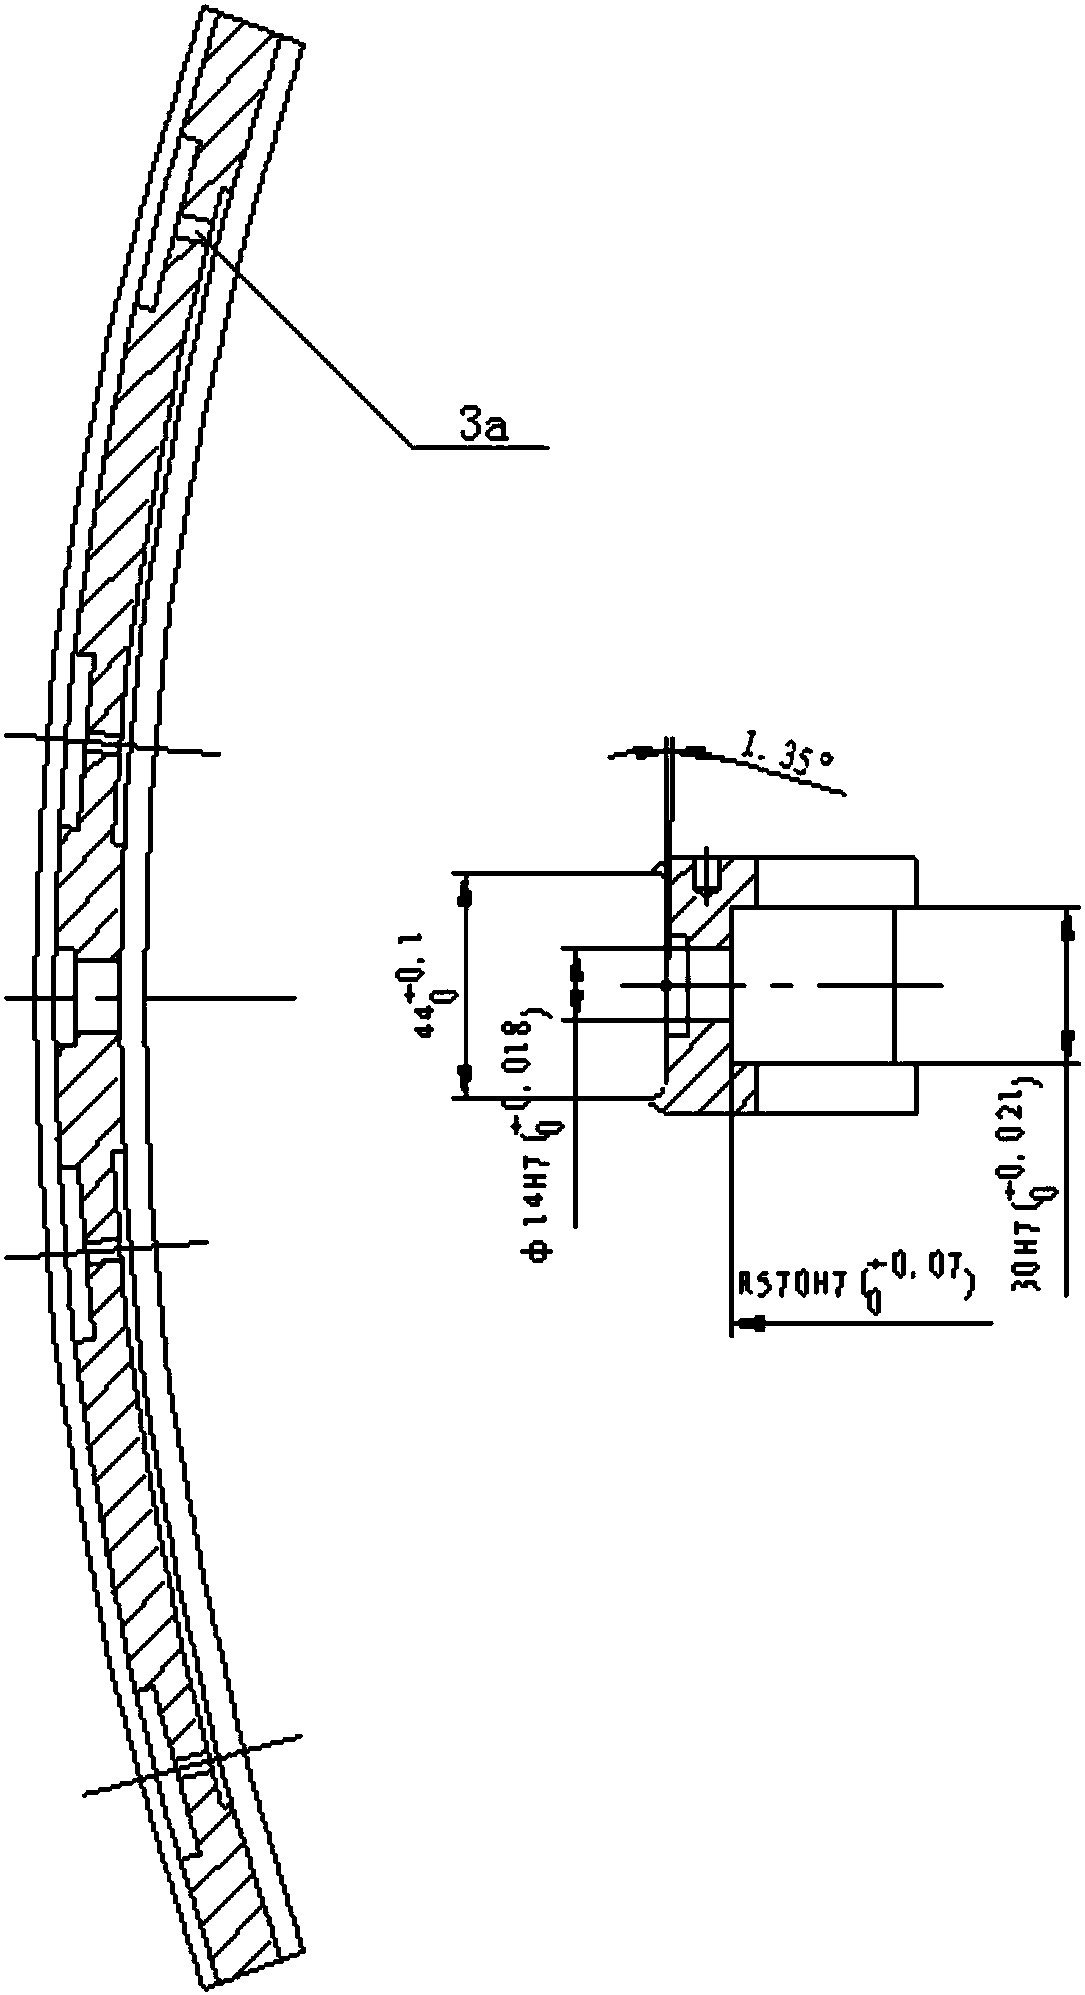 A two-way positioning thin-walled welding fixture